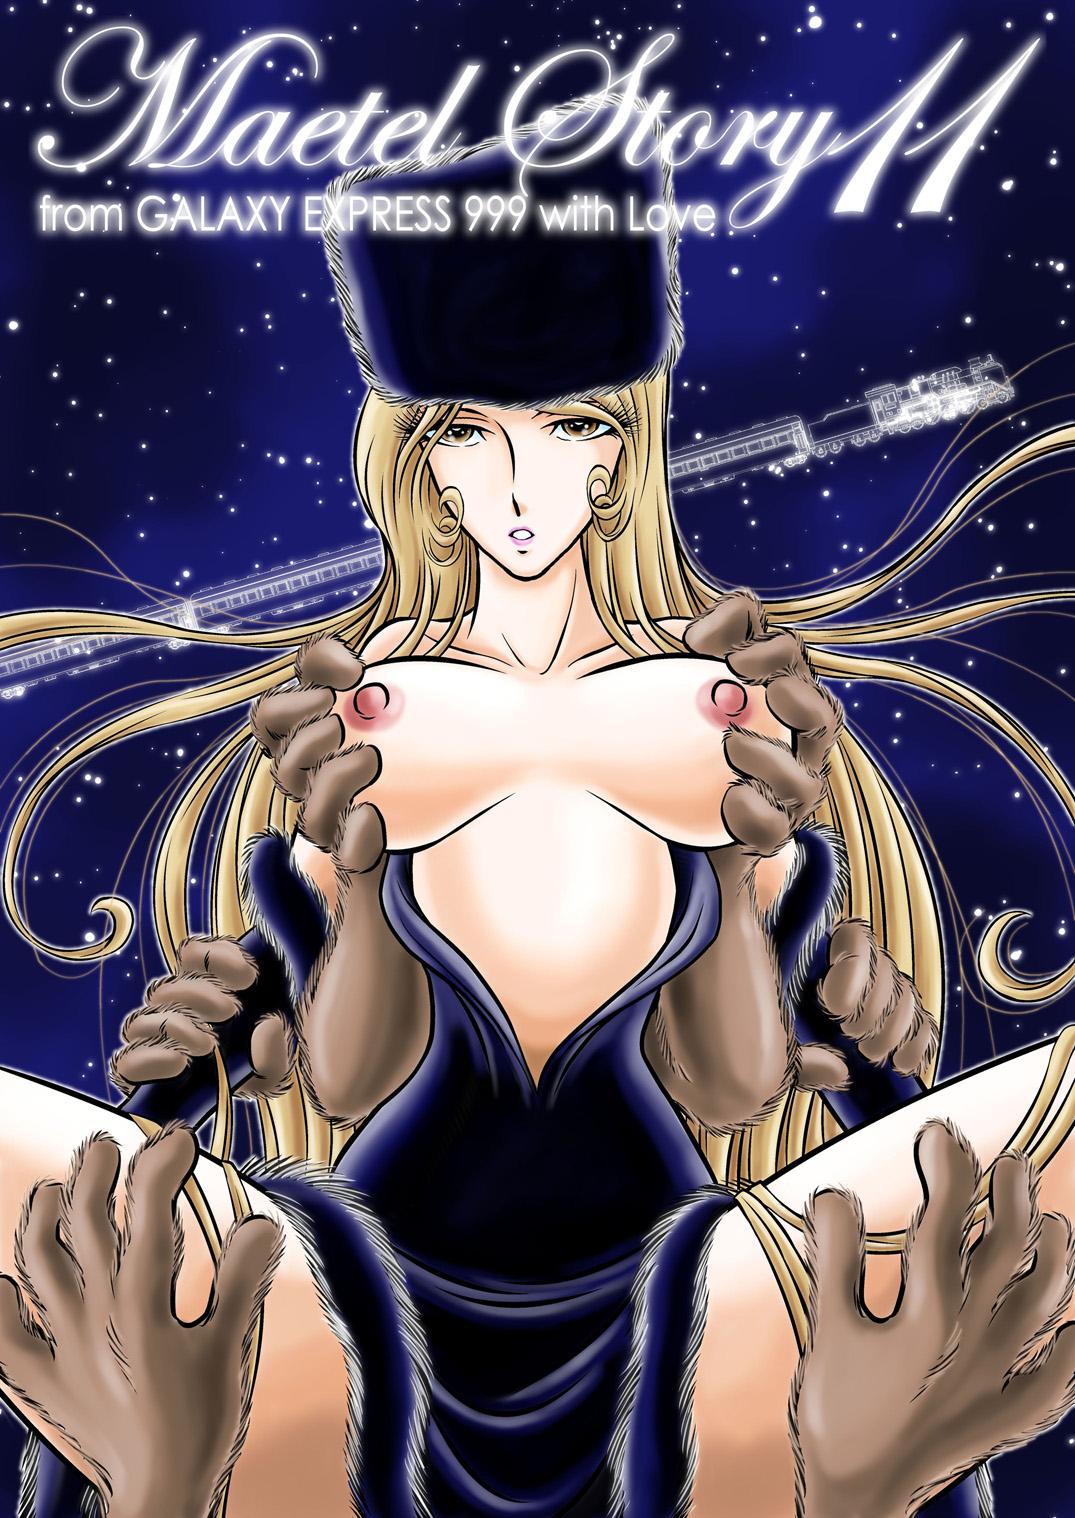 Onlyfans Maetel Story 11 - Galaxy express 999 Phat - Picture 1